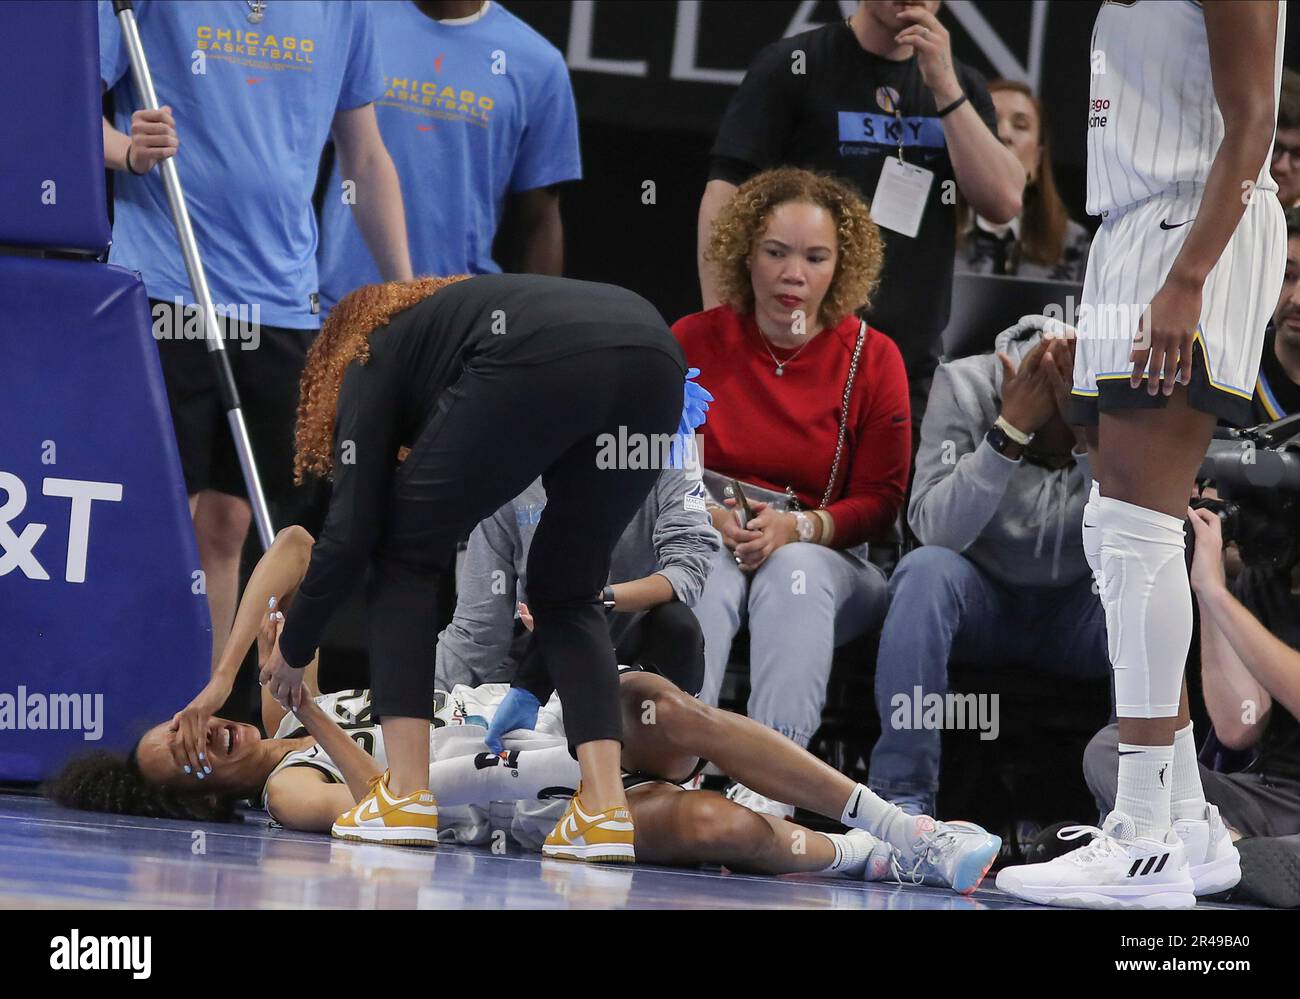 CHICAGO, IL - MAY 26: Chicago Sky guard Rebekah Gardner (35) lays on the  ground after an injury to her foot during a WNBA game between the  Washington Mystics and the Chicago